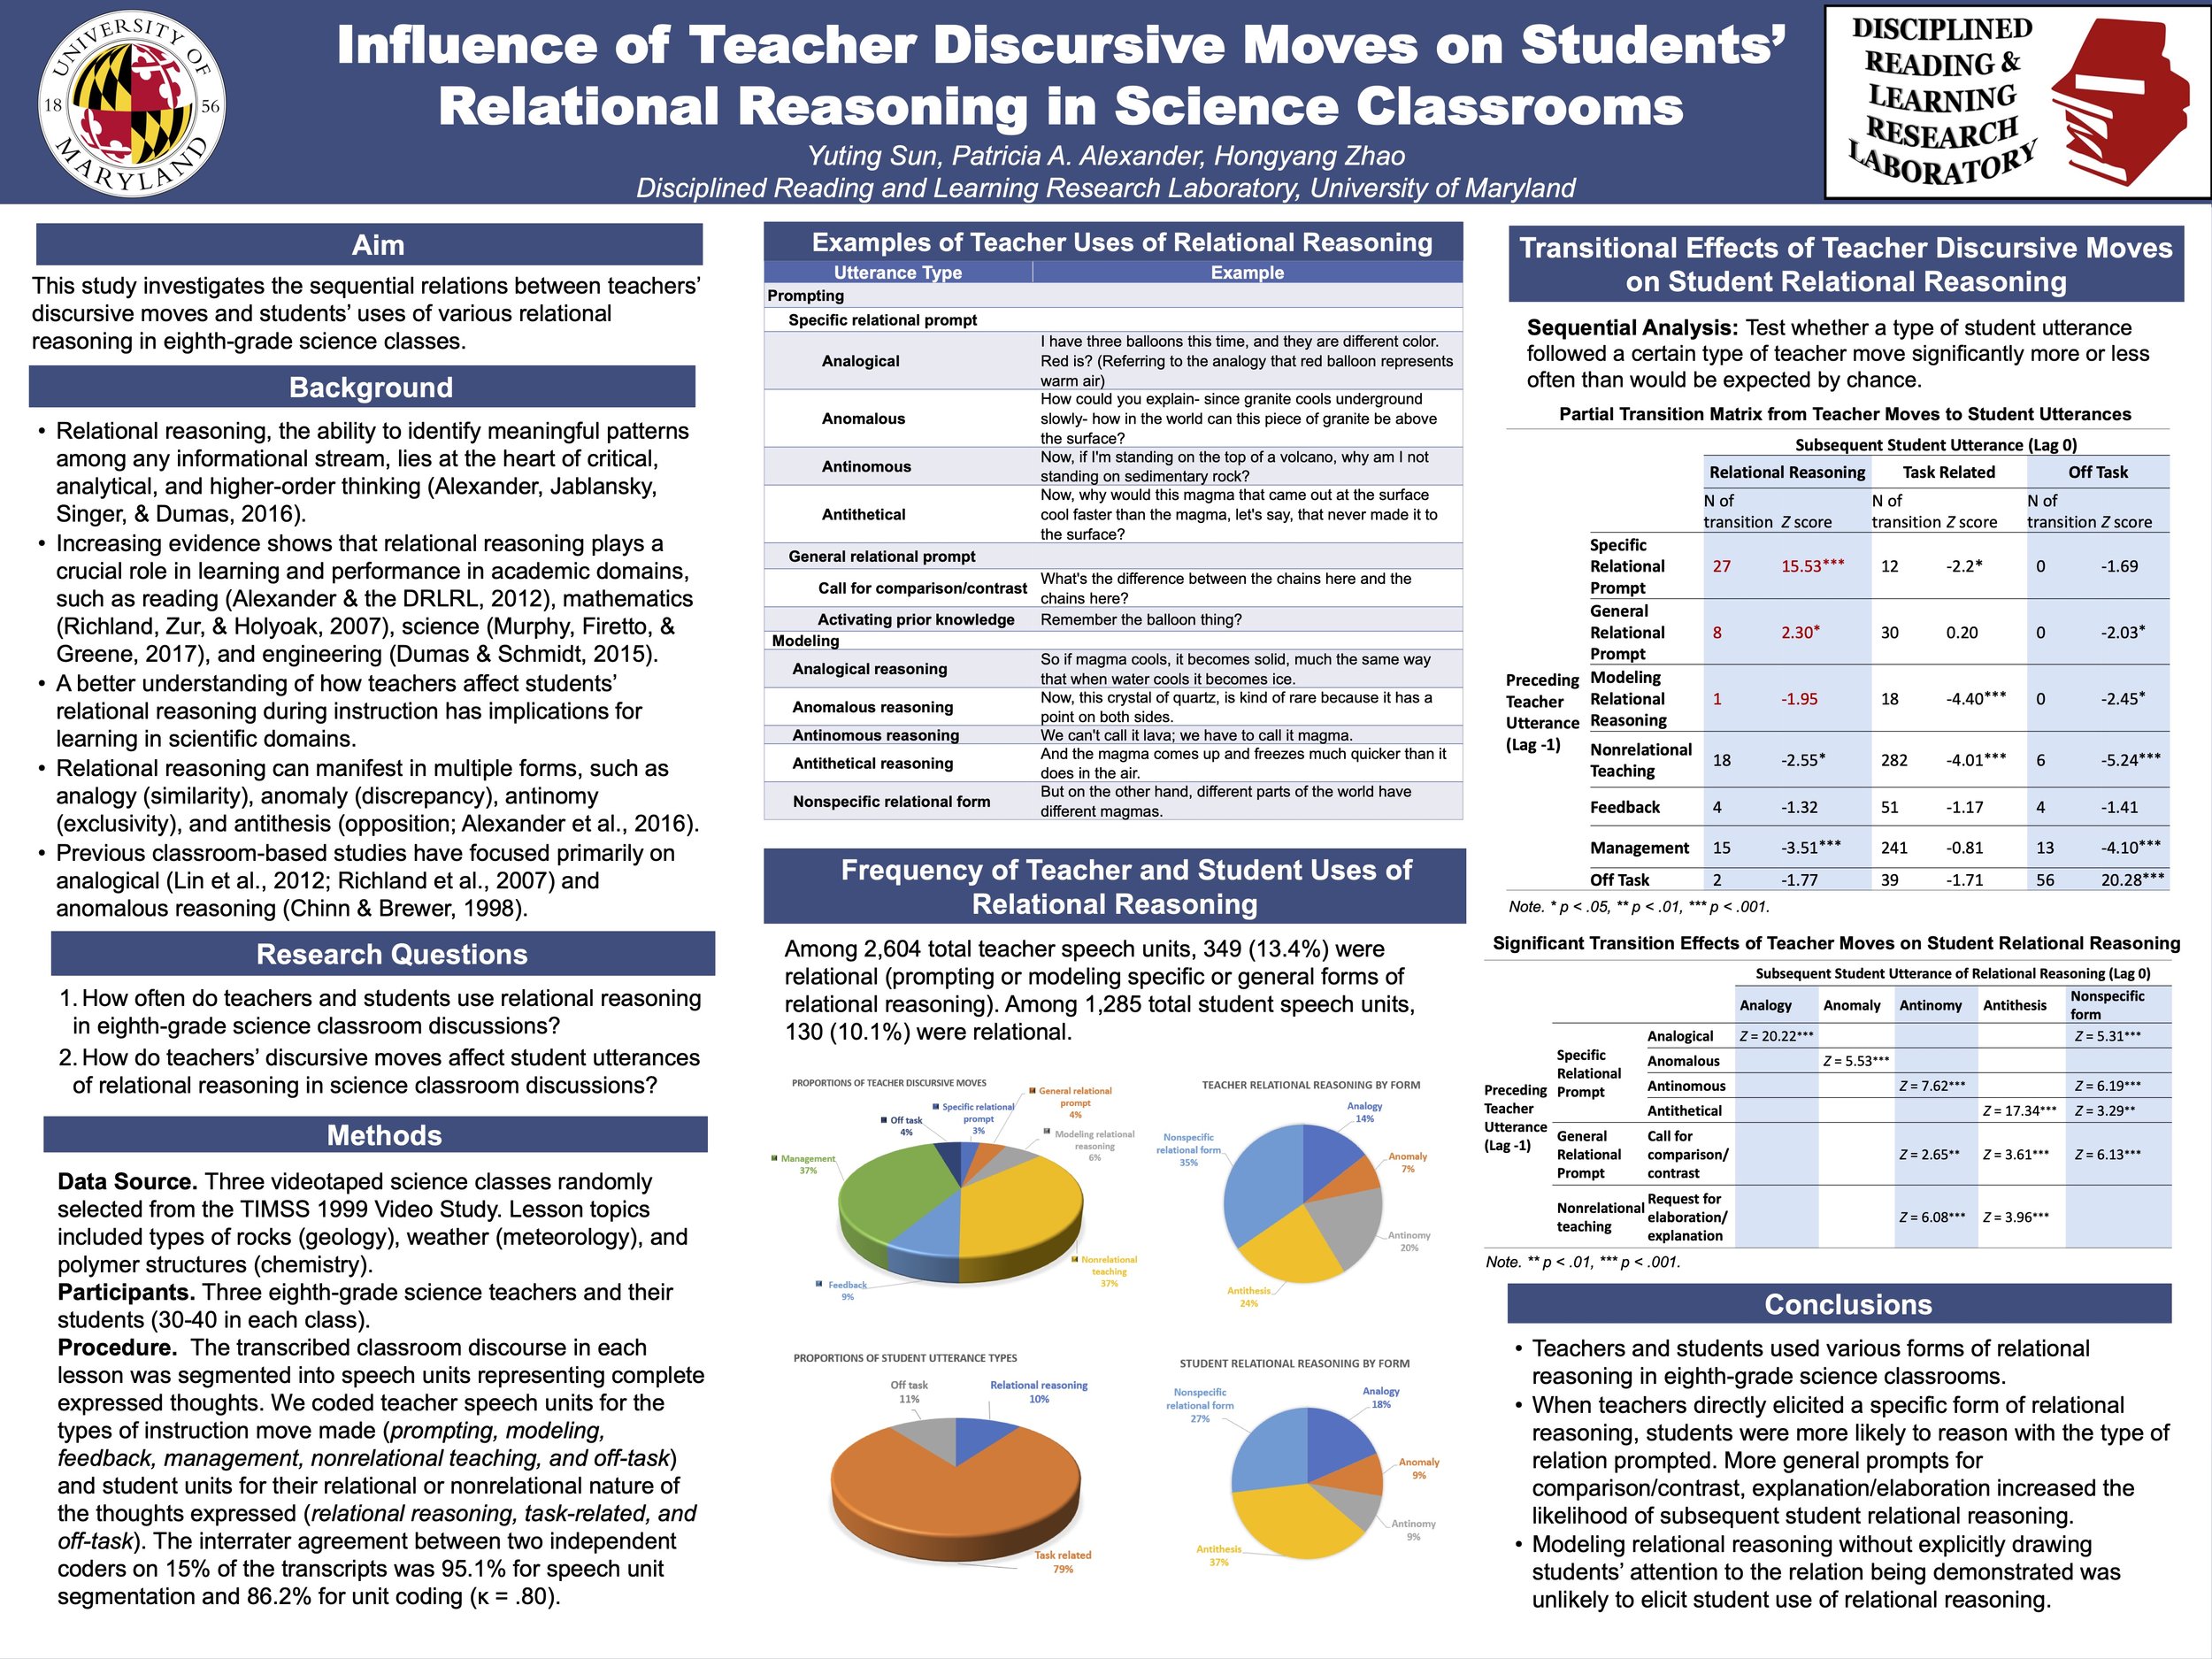 Influence of Teacher Discursive Moves on Students’ Relational Reasoning in Science Classrooms